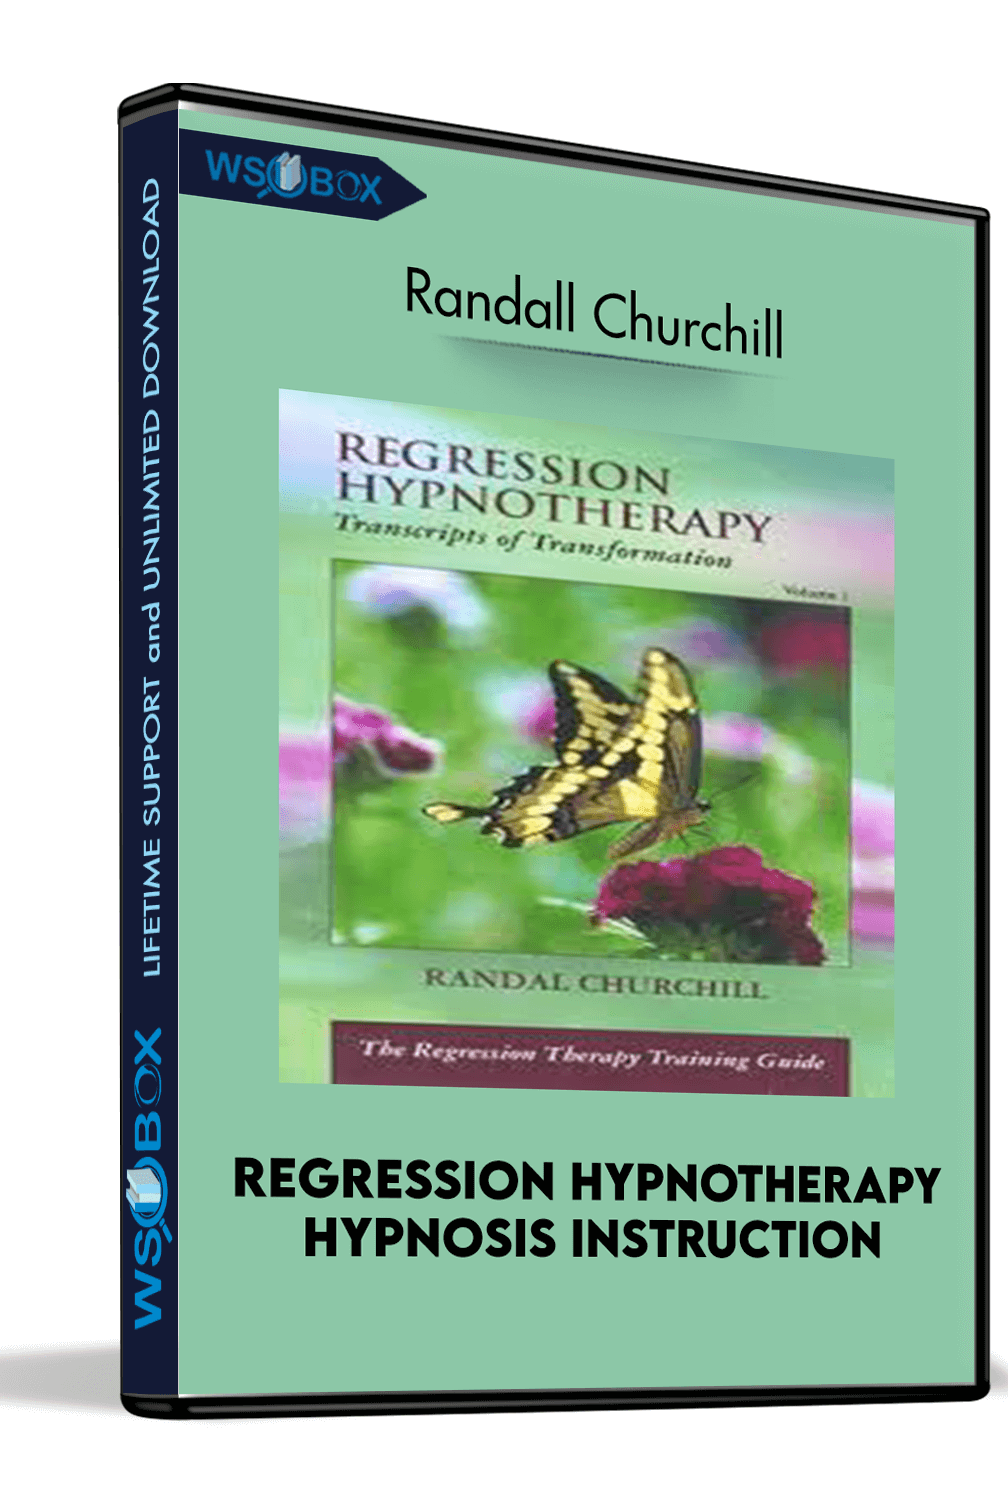 regression-hypnotherapy-hypnosis-instruction-randall-churchill